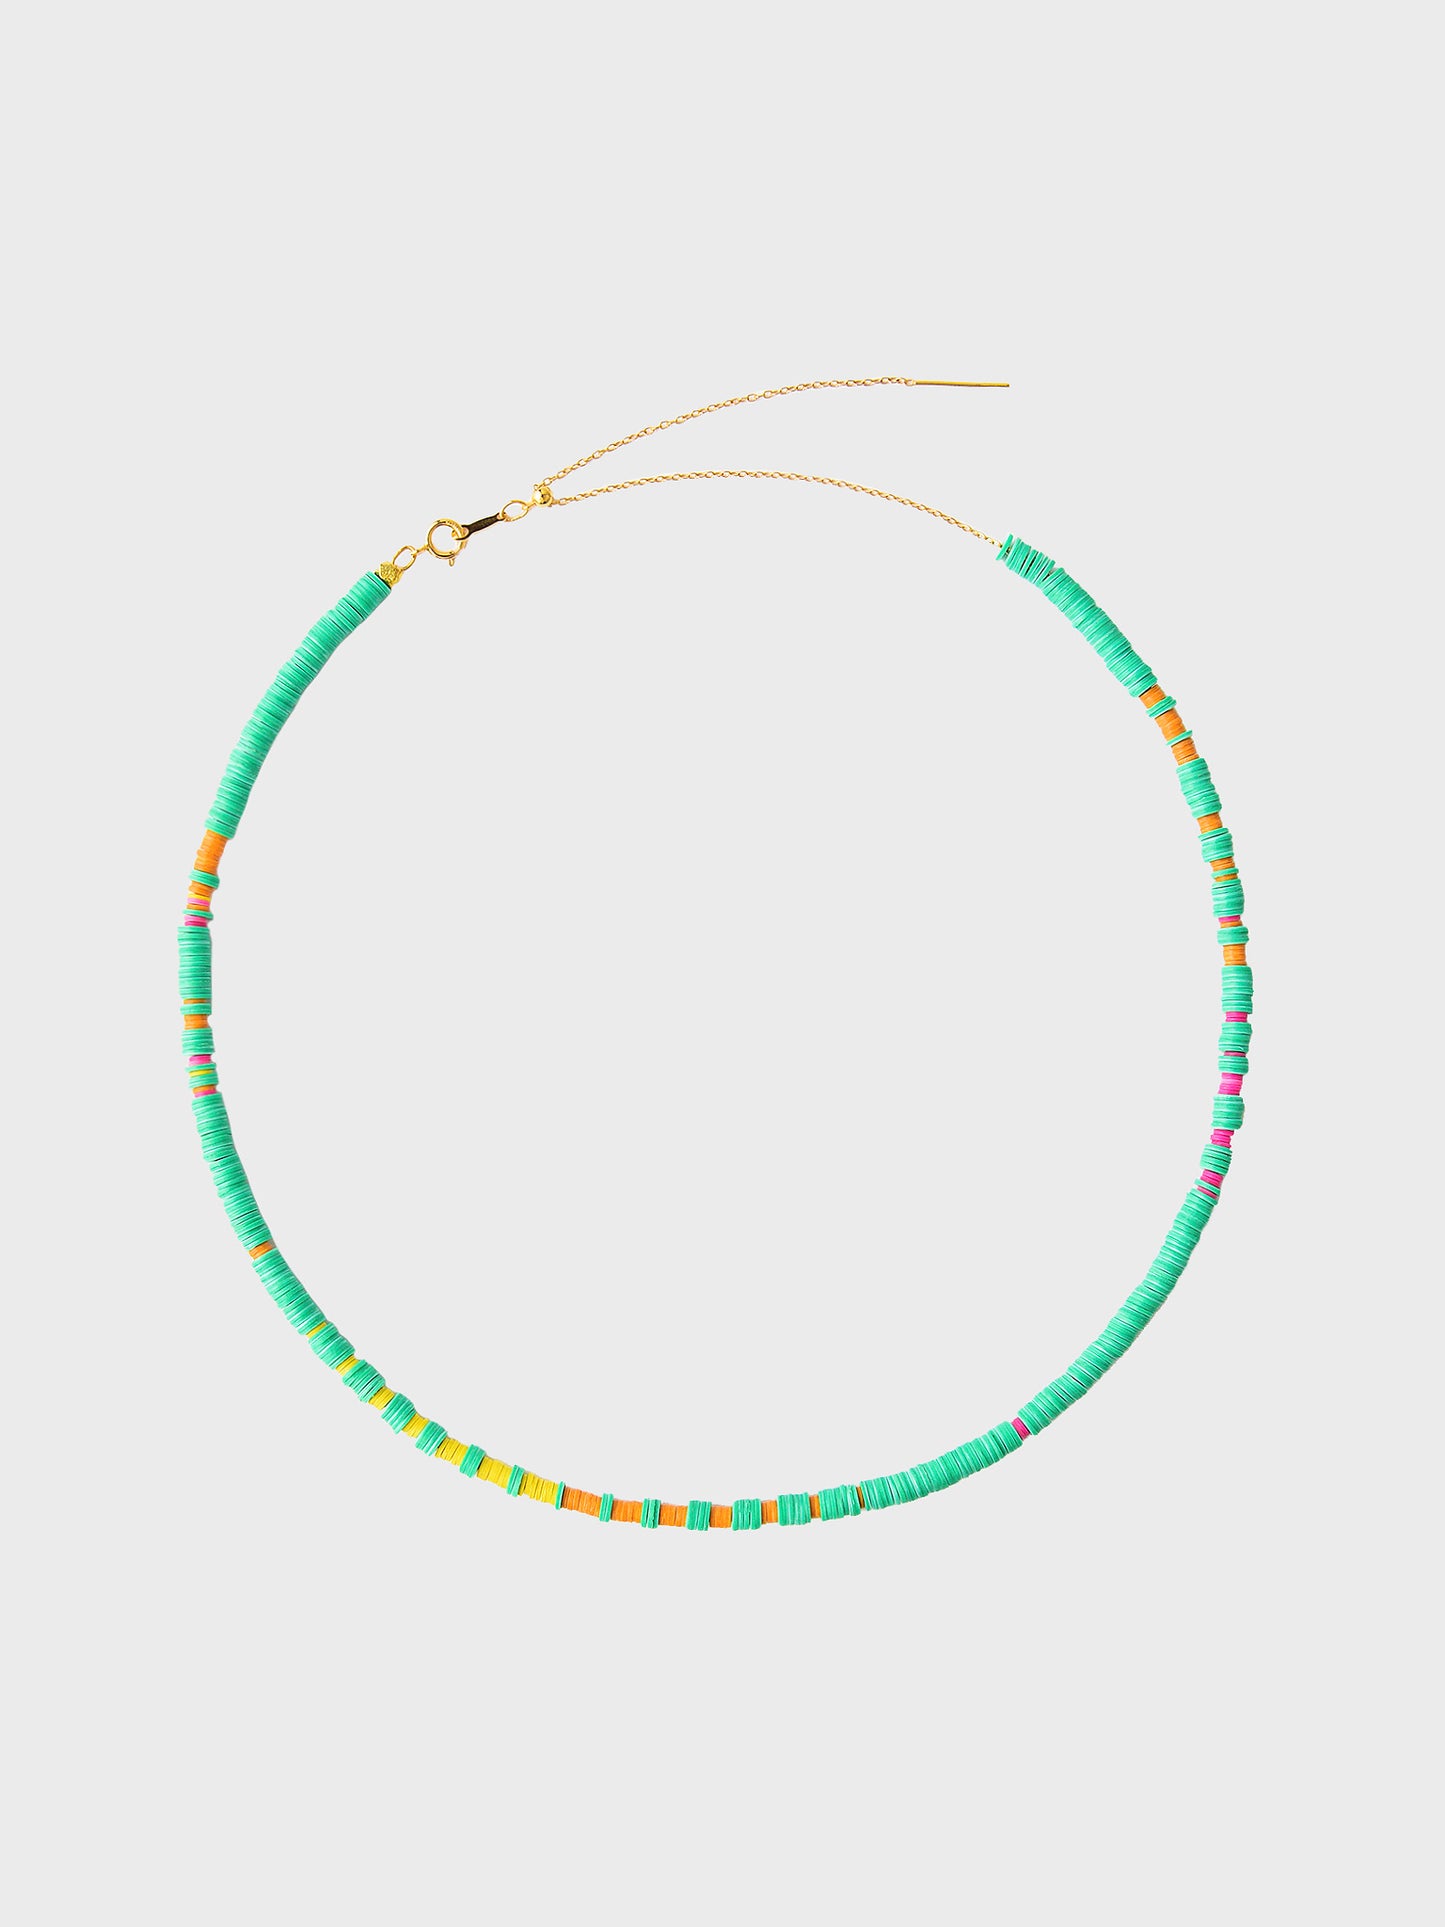 Annie O'Grady Designs Gold-Filled Chain with Turquoise and Pink Vinyl Beads Necklace